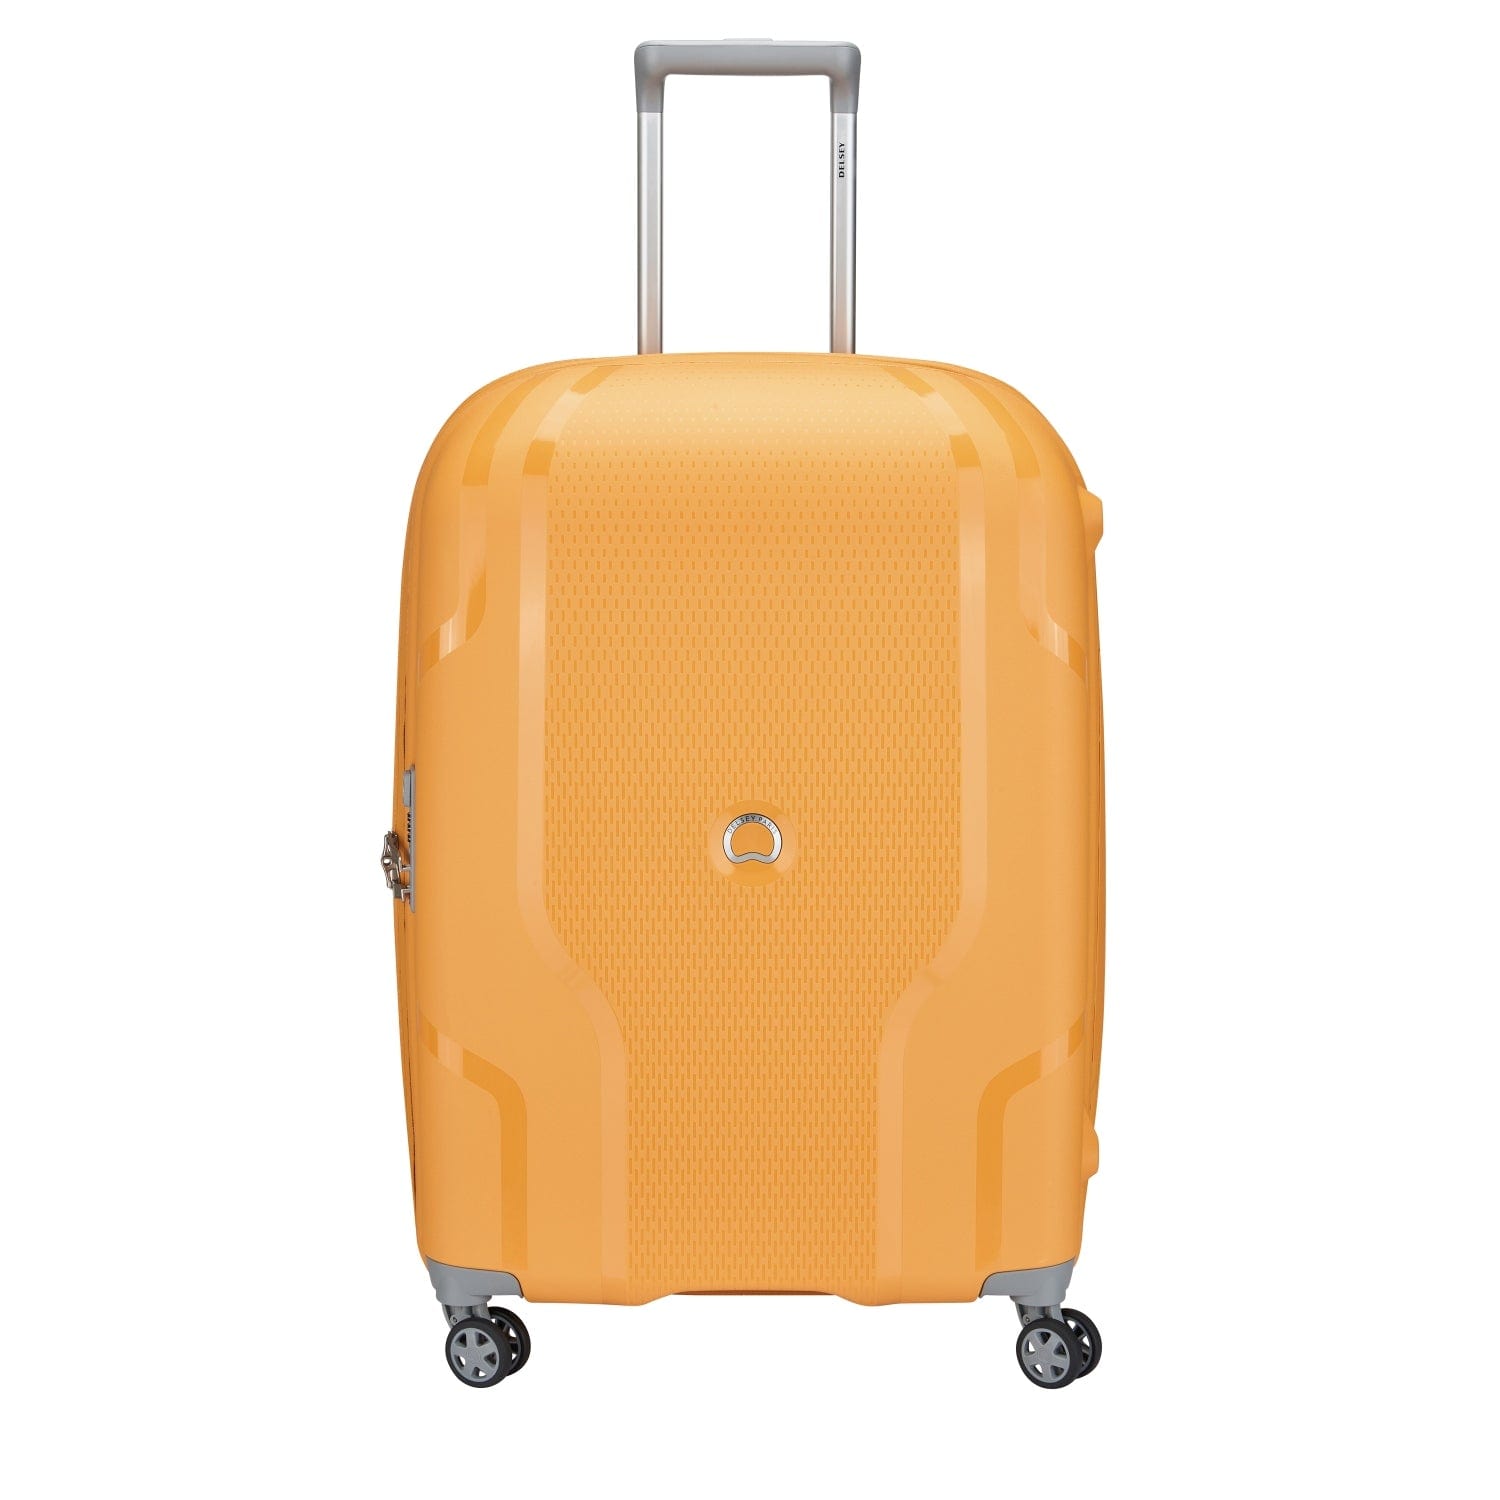 Delsey Clavel 70cm Hardcase 4 Double Wheel Expandable Check-In Luggage Trolley Yellow - 00384582005